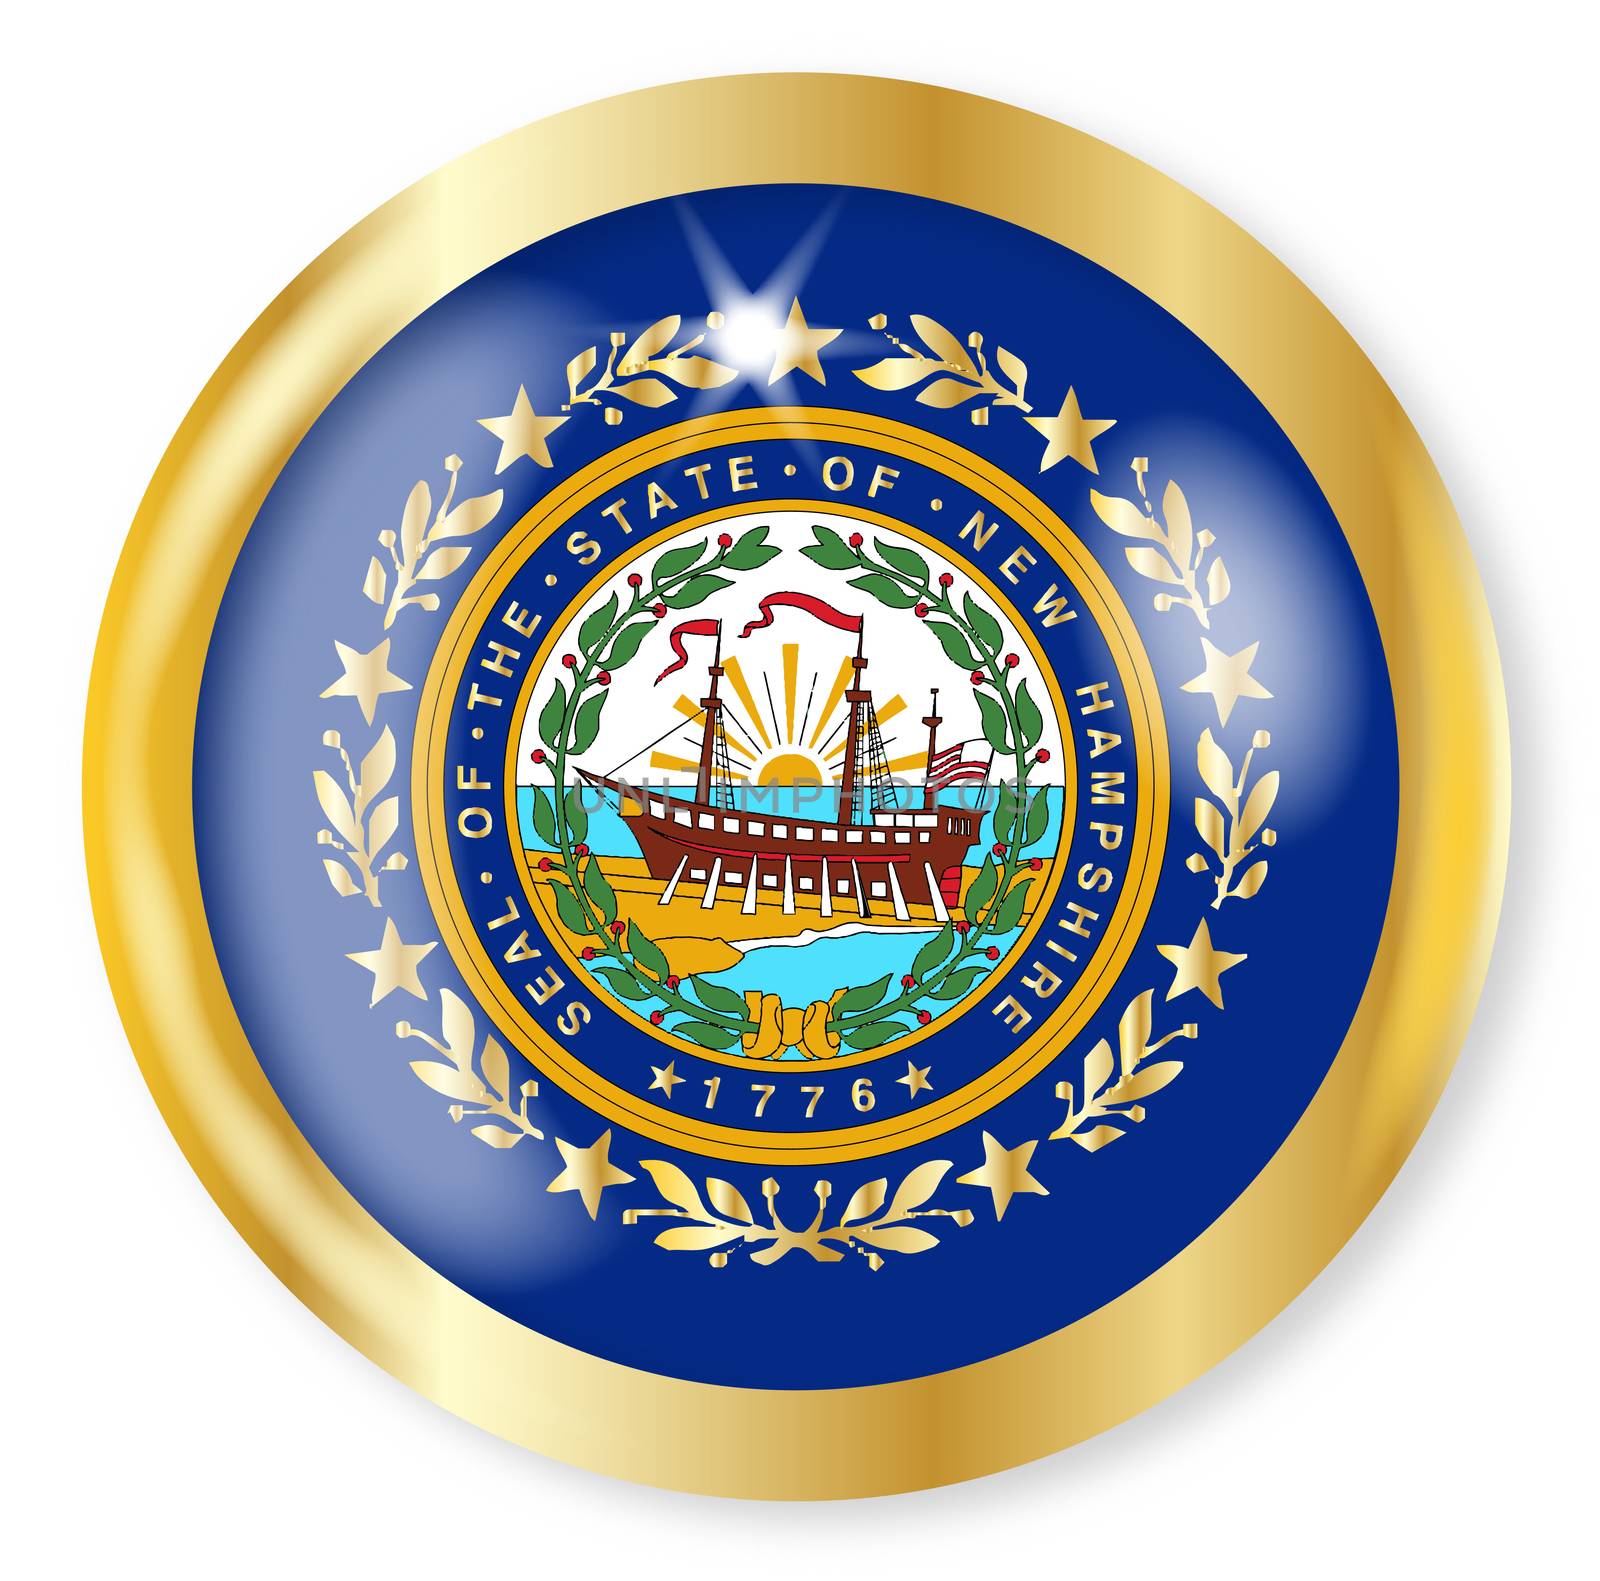 New Hampshire state flag button with a gold metal circular border over a white background